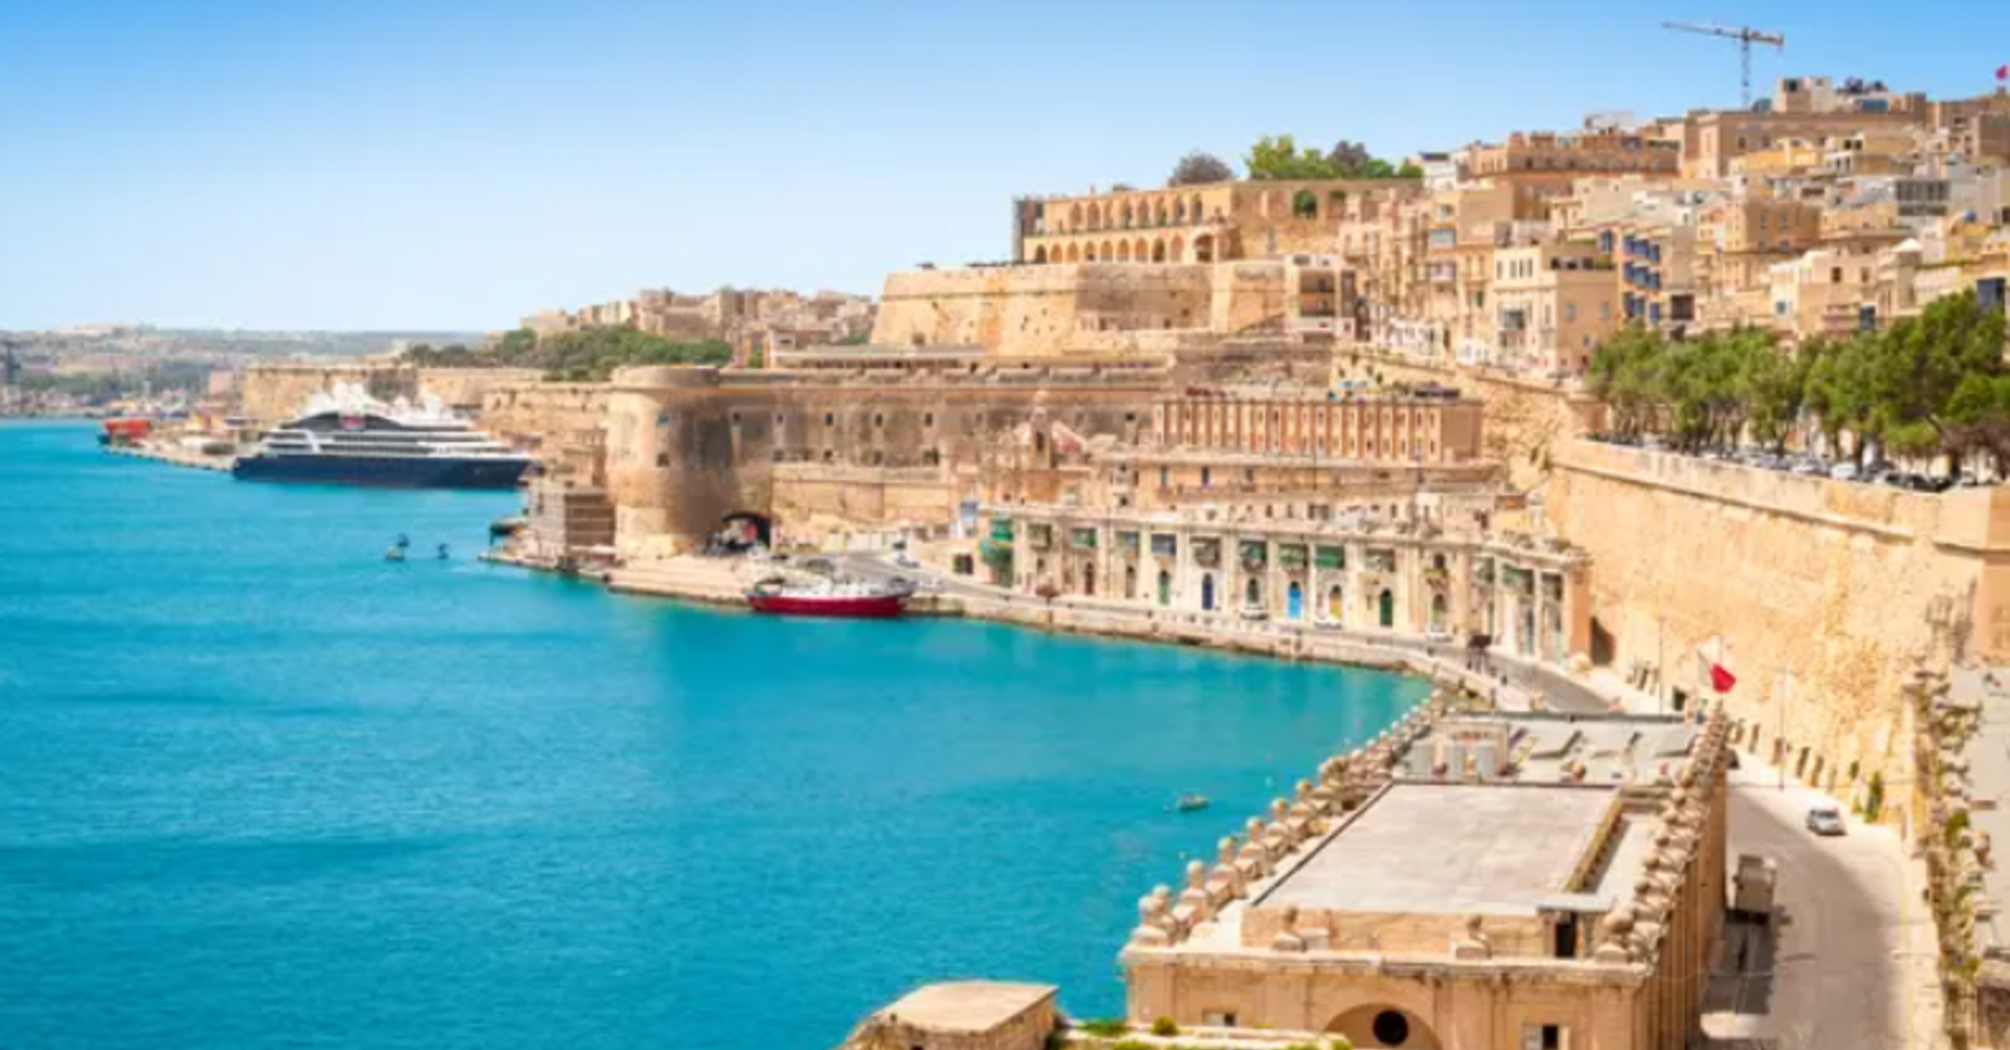 10 best things to do in the capital of Malta